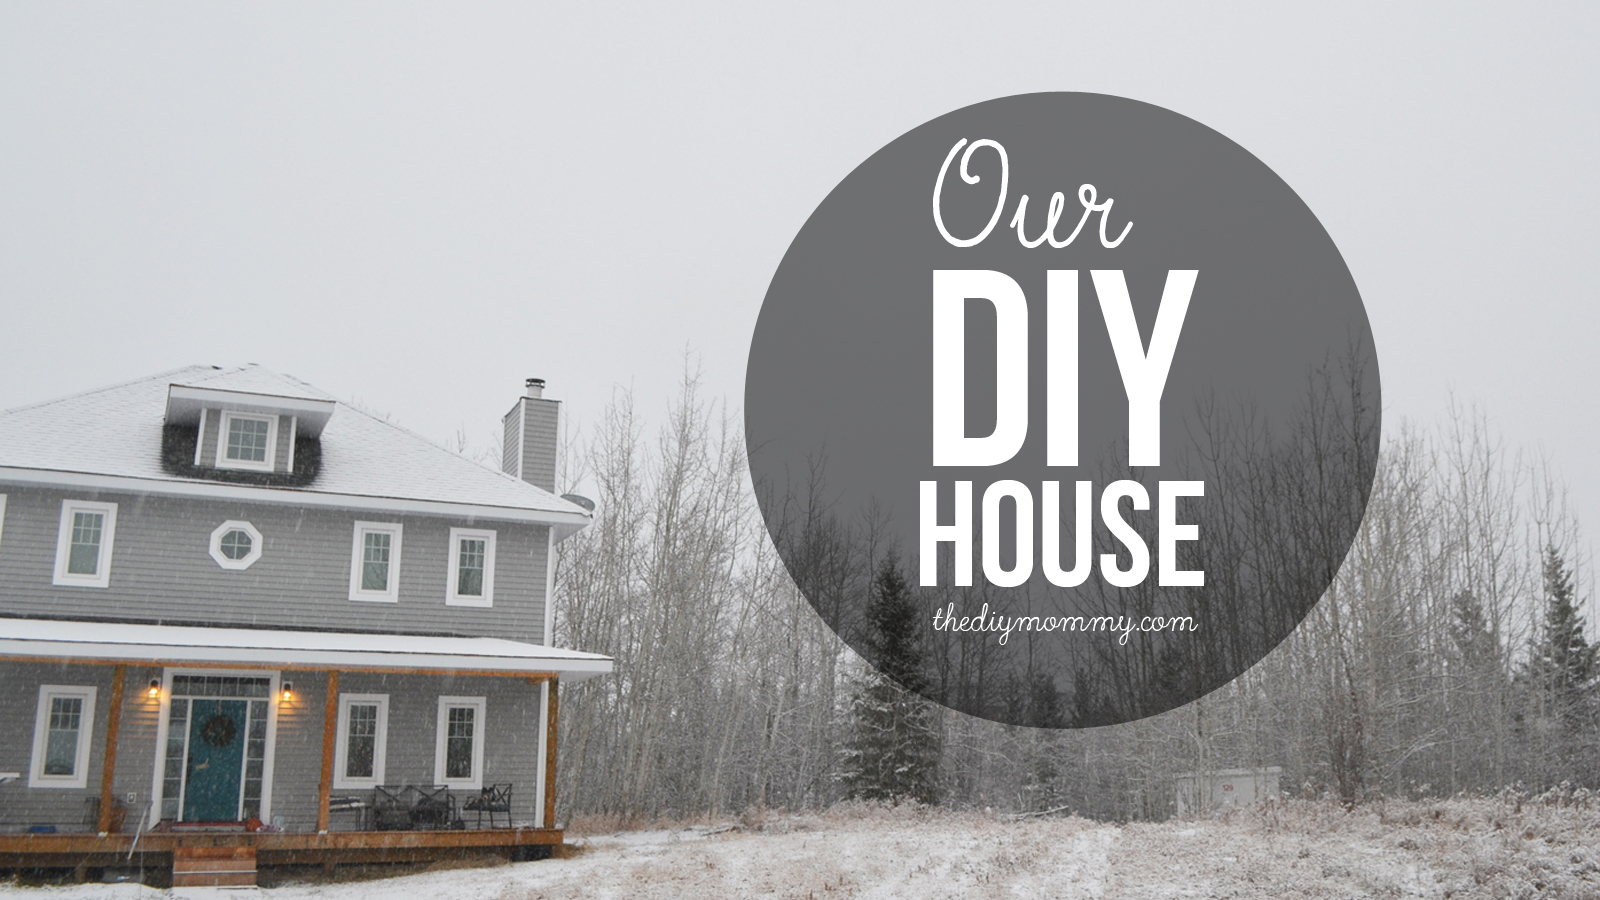 Our DIY House: How we built a home from foundation to finishing on our own